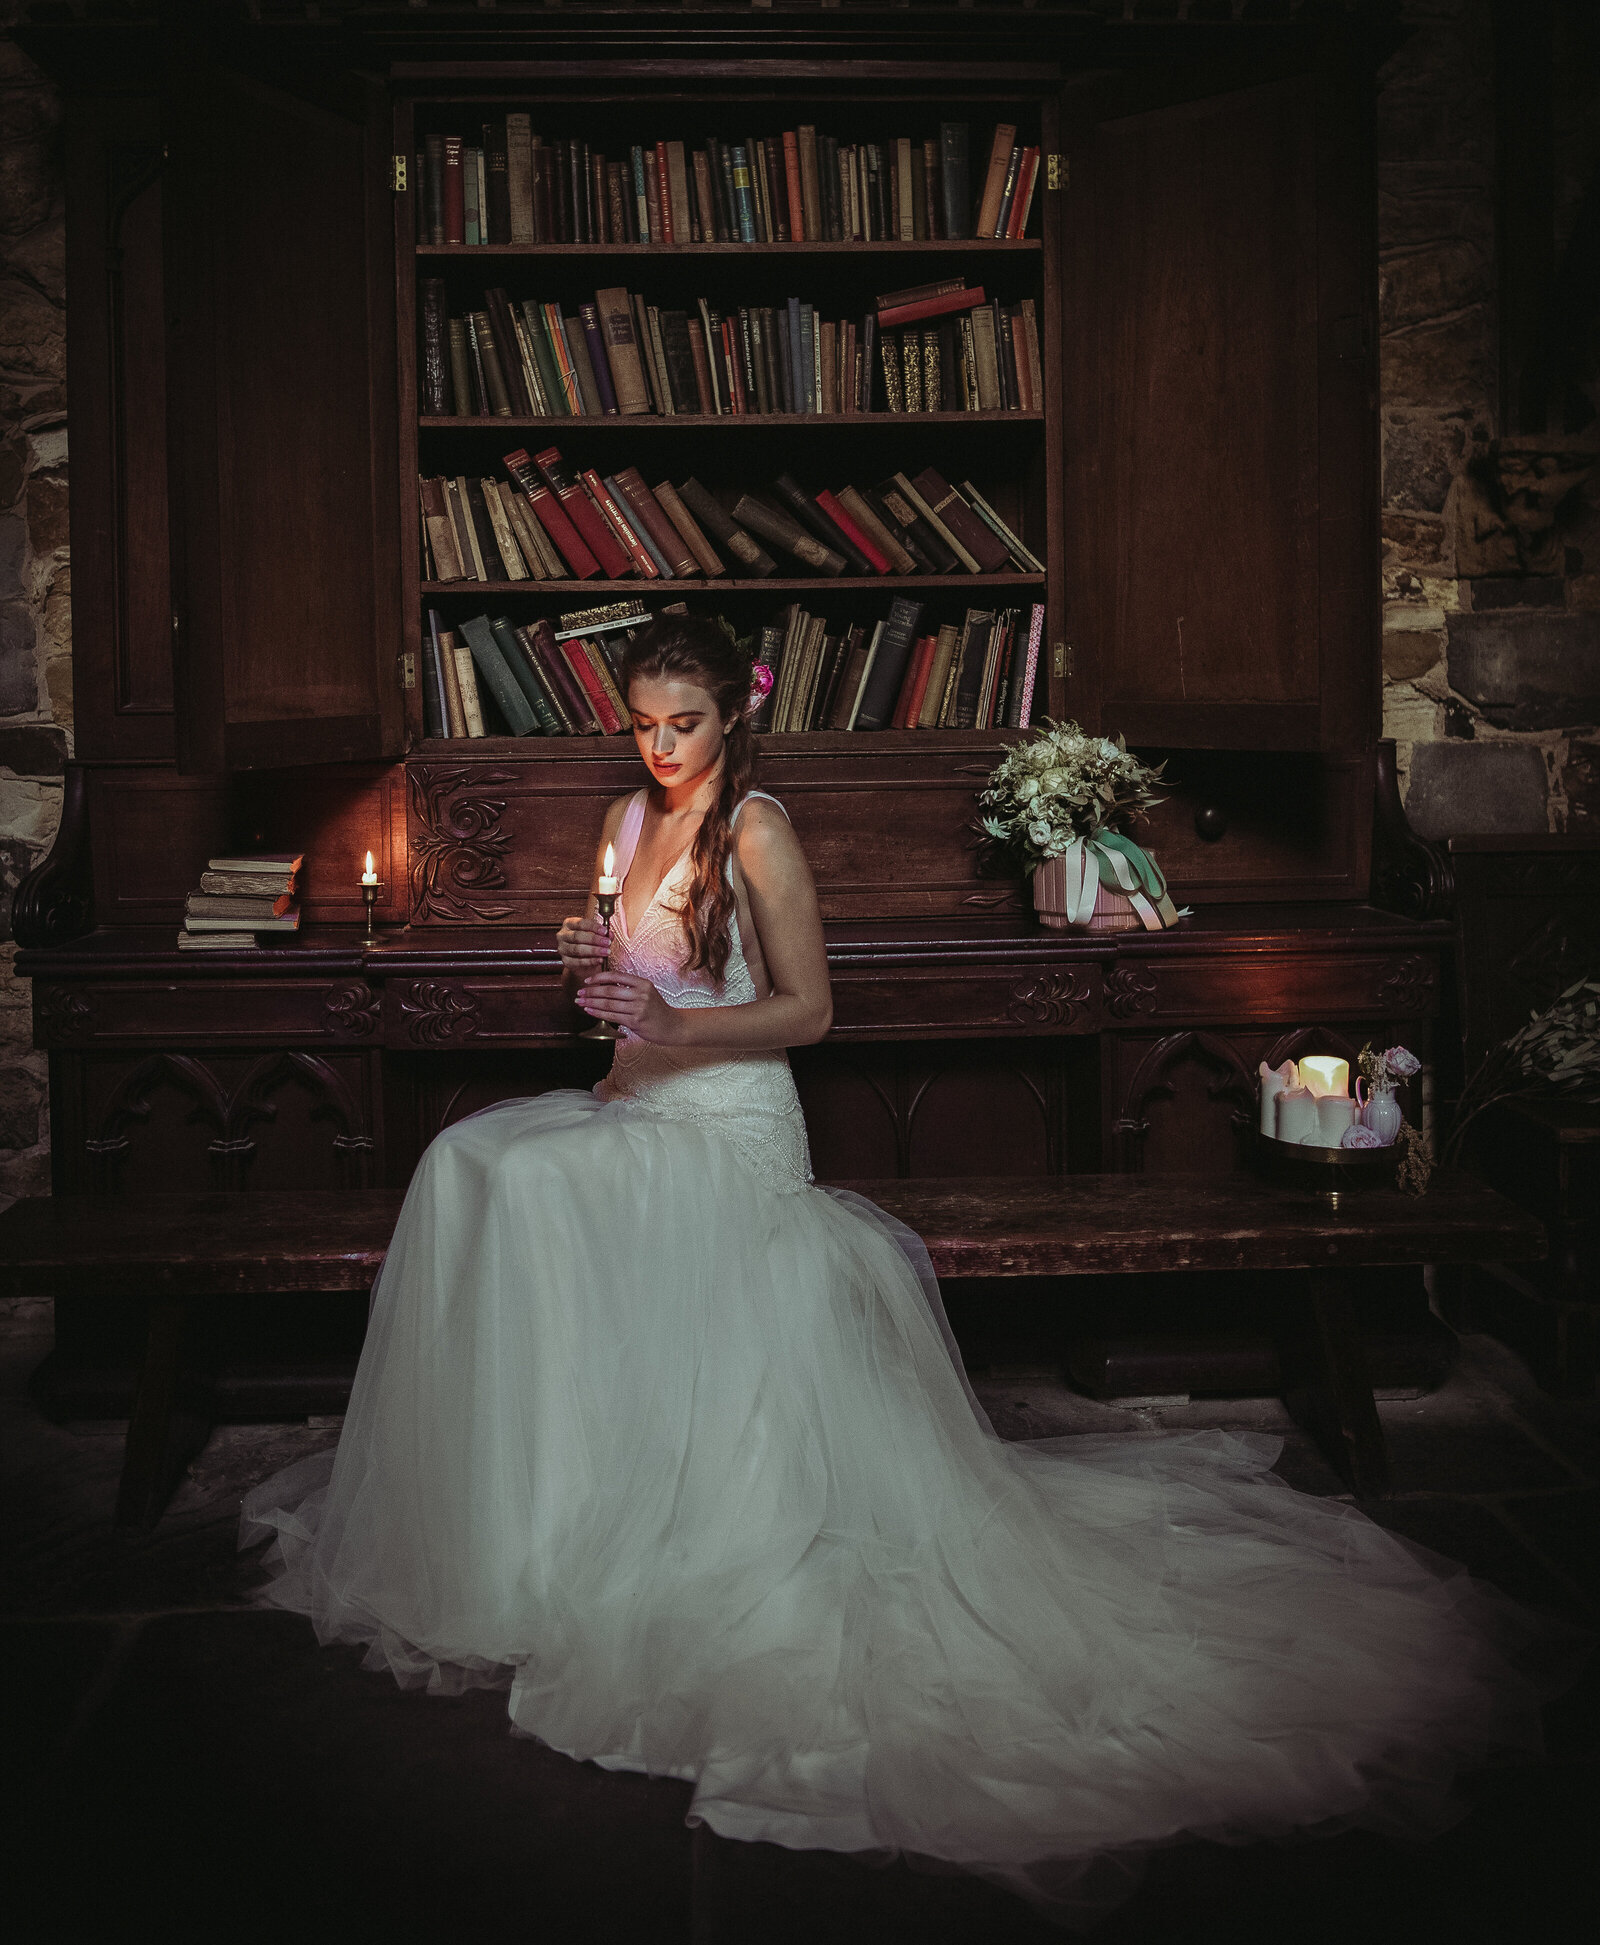 Soft, warm candlelight highlighting bride's beauty